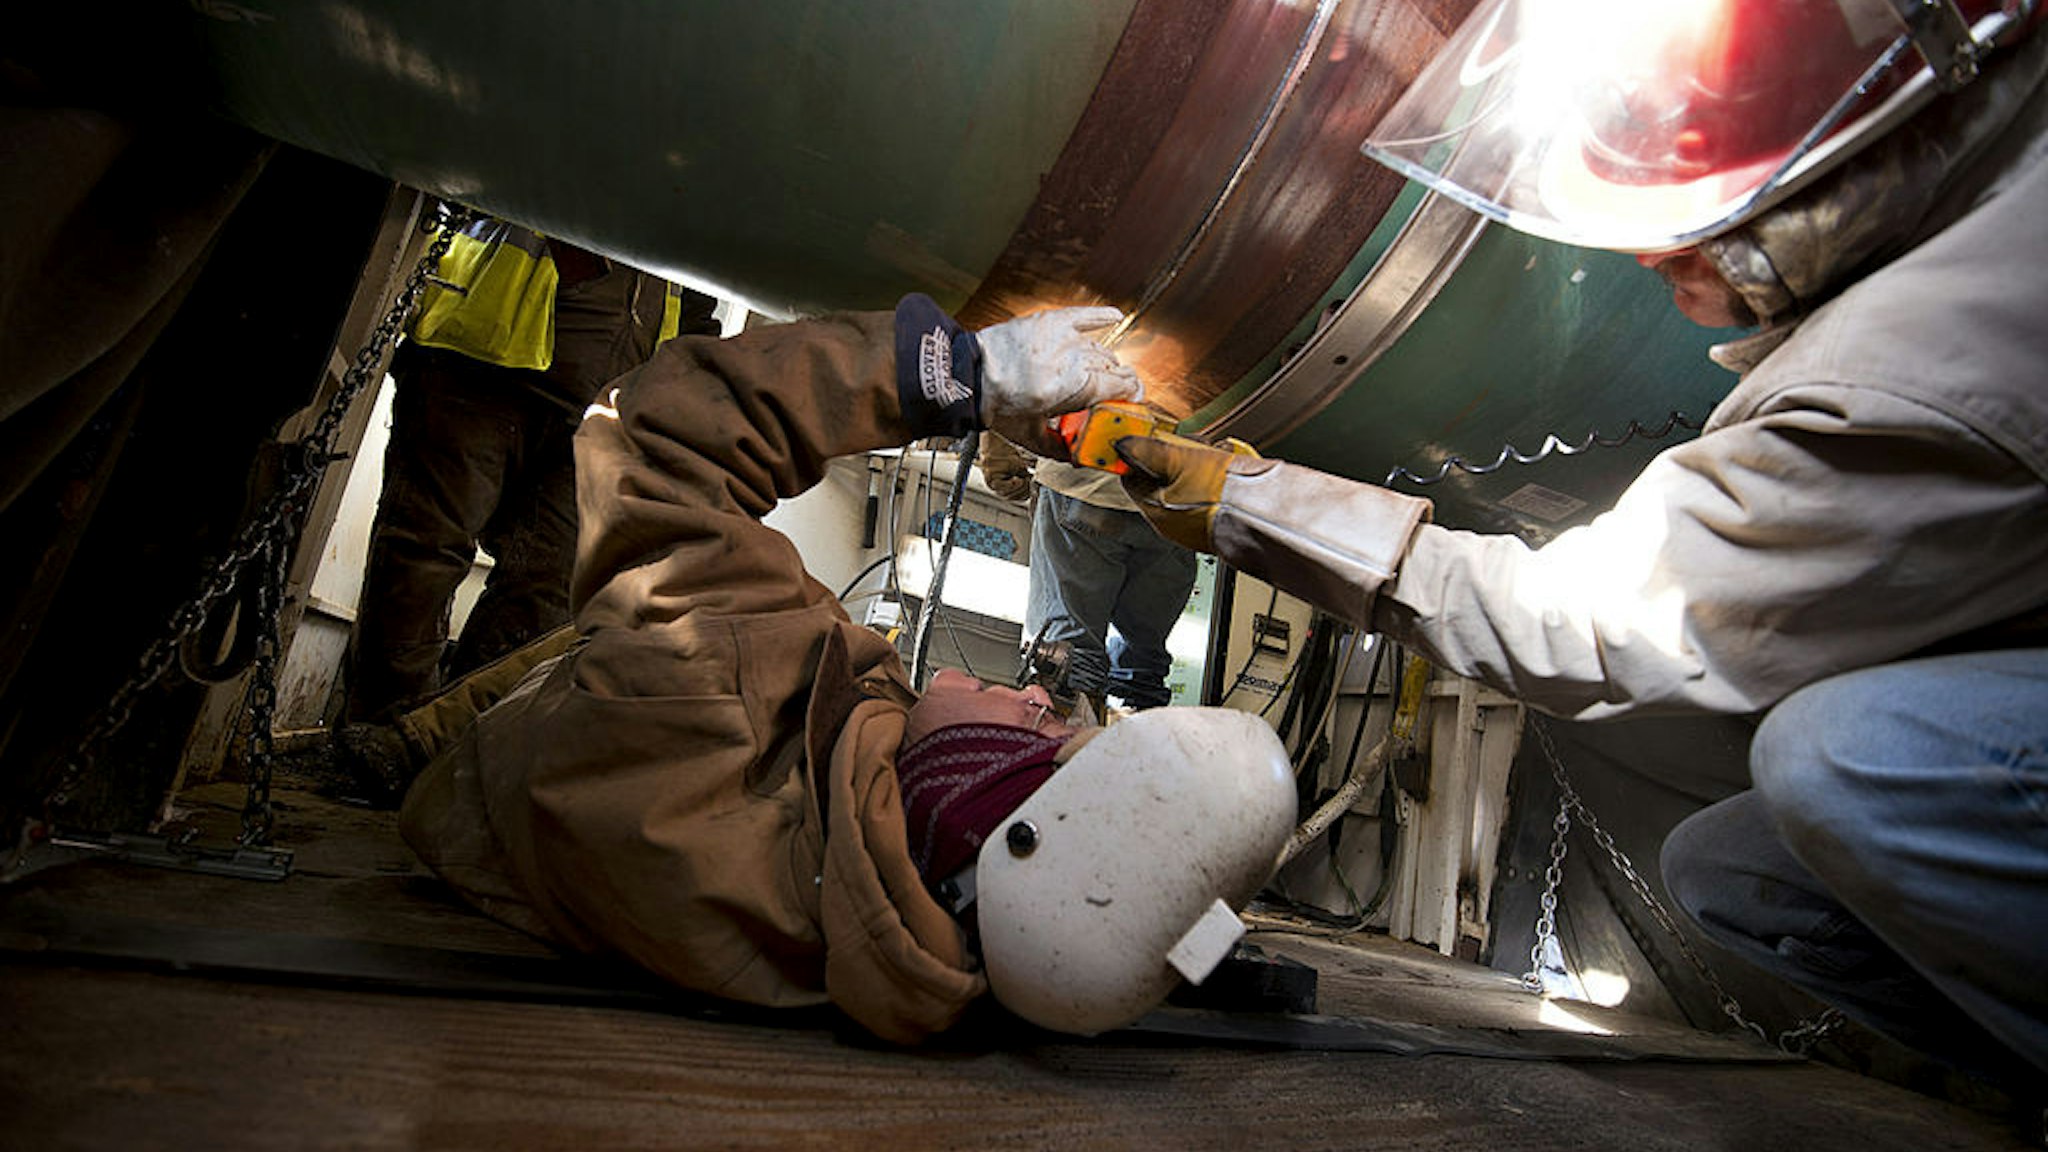 Workers inspect a weld on the joint between two sections of pipe on a Gulf Coast Project pipeline in Atoka, Oklahoma, U.S., on Monday, March 11, 2013.